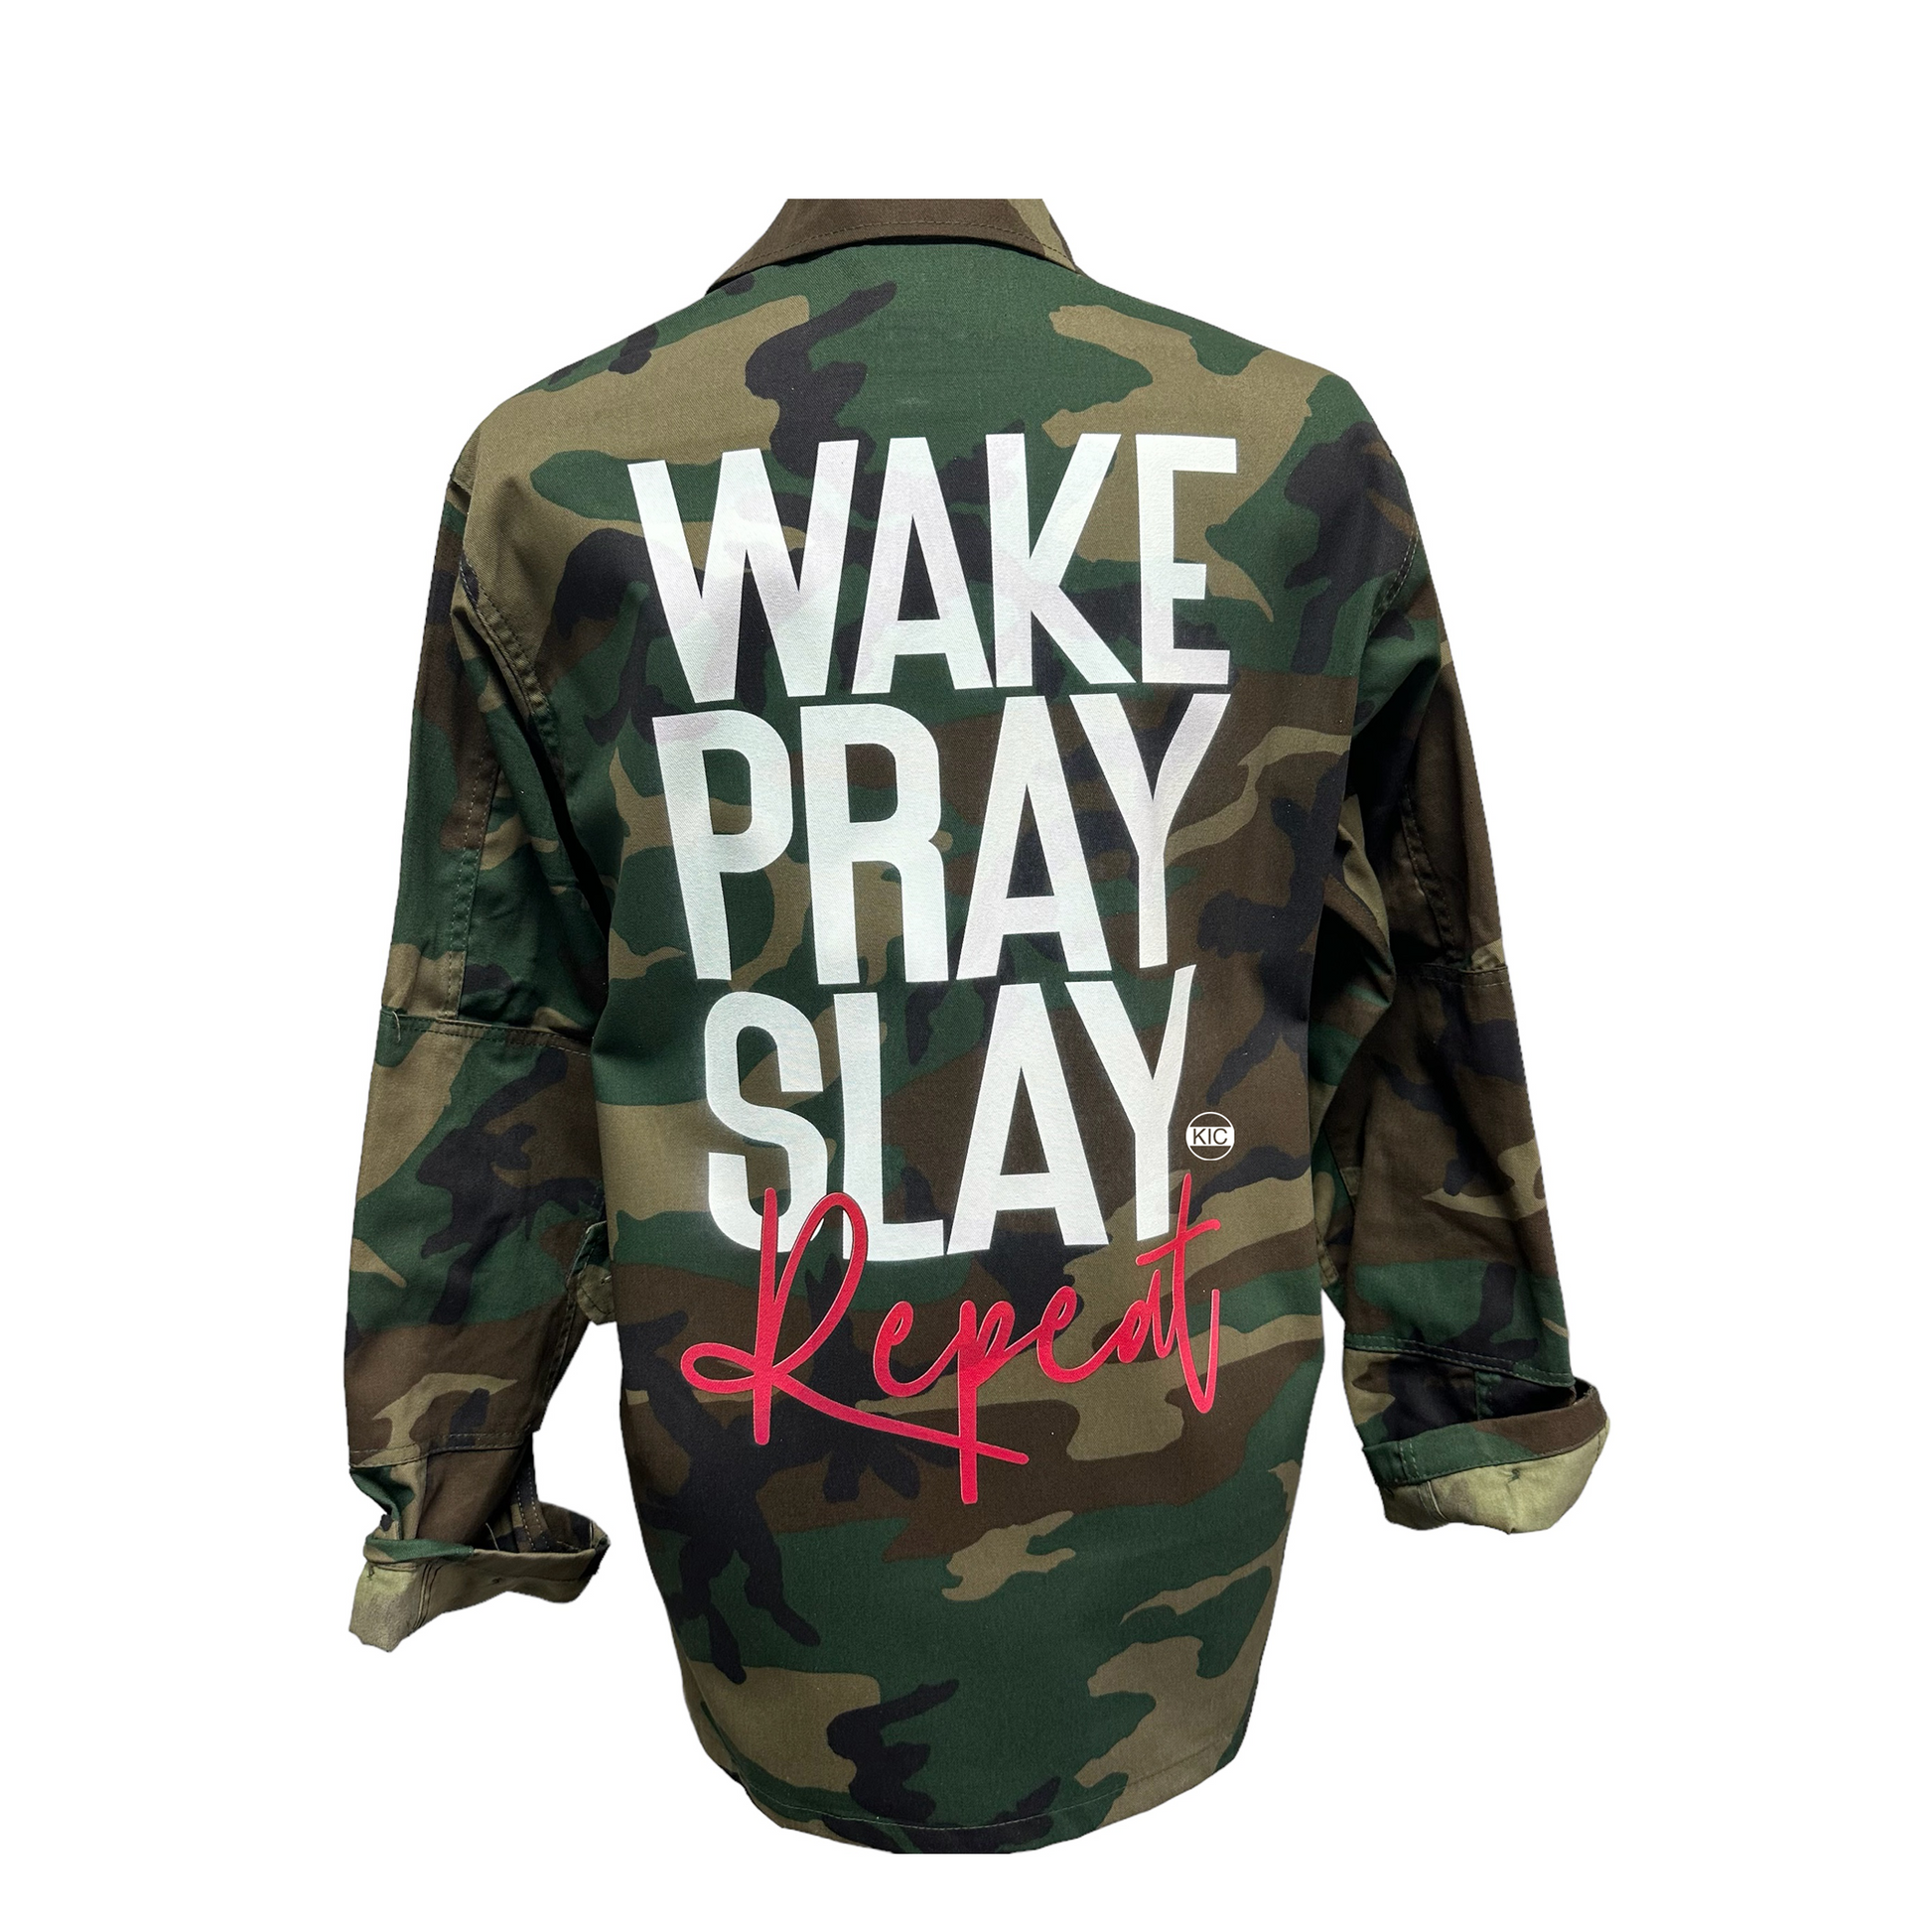 Stylish jacket featuring the empowering text 'Wake. Pray. Slay. Repeat.', symbolizing daily resilience and determination, by KIC NYC.